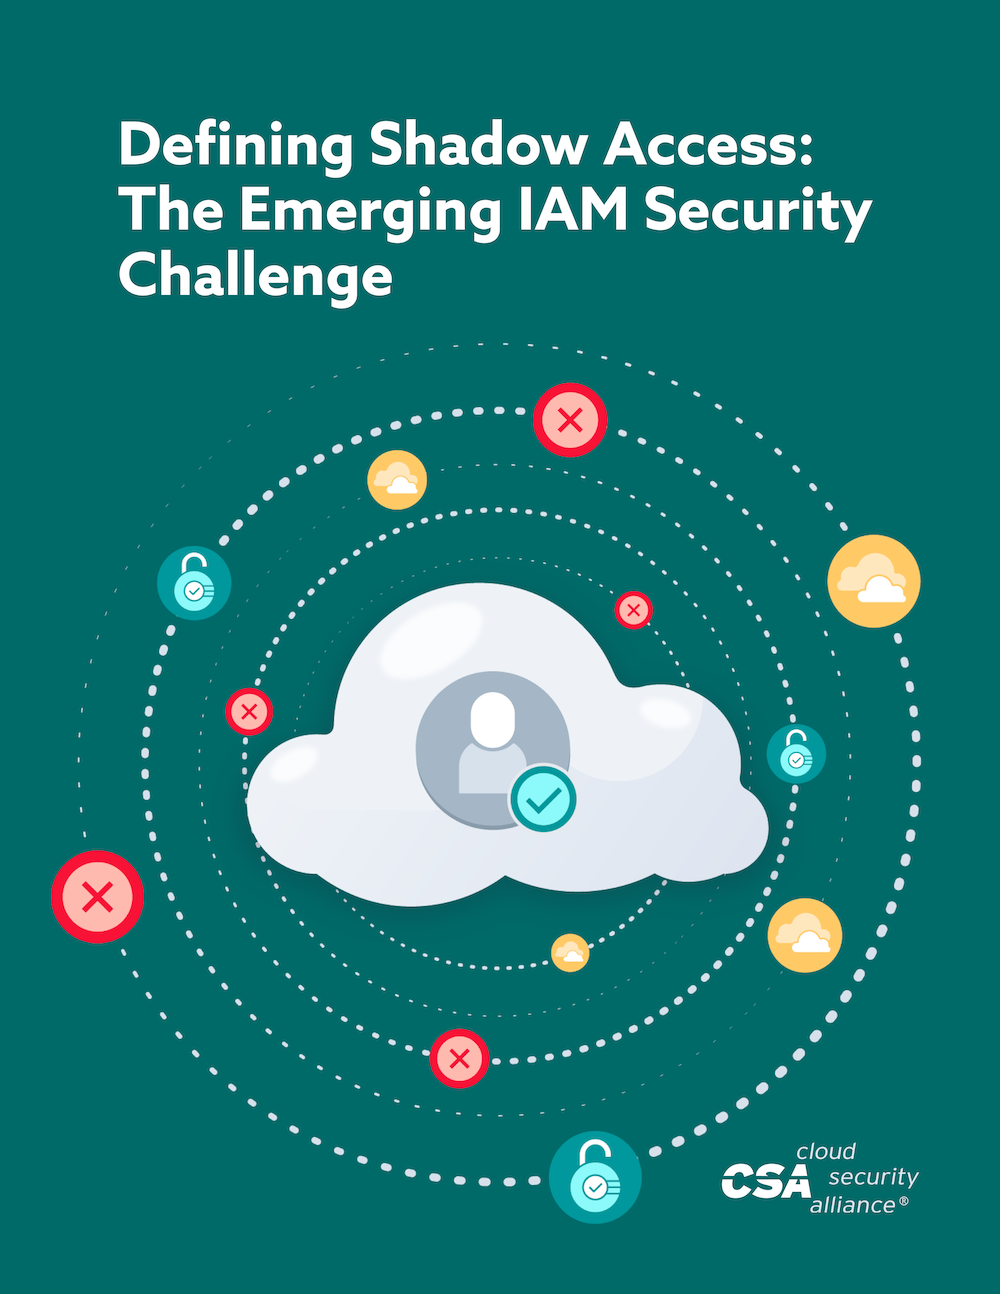 Defining Shadow Access: The Emerging IAM Security Challenge